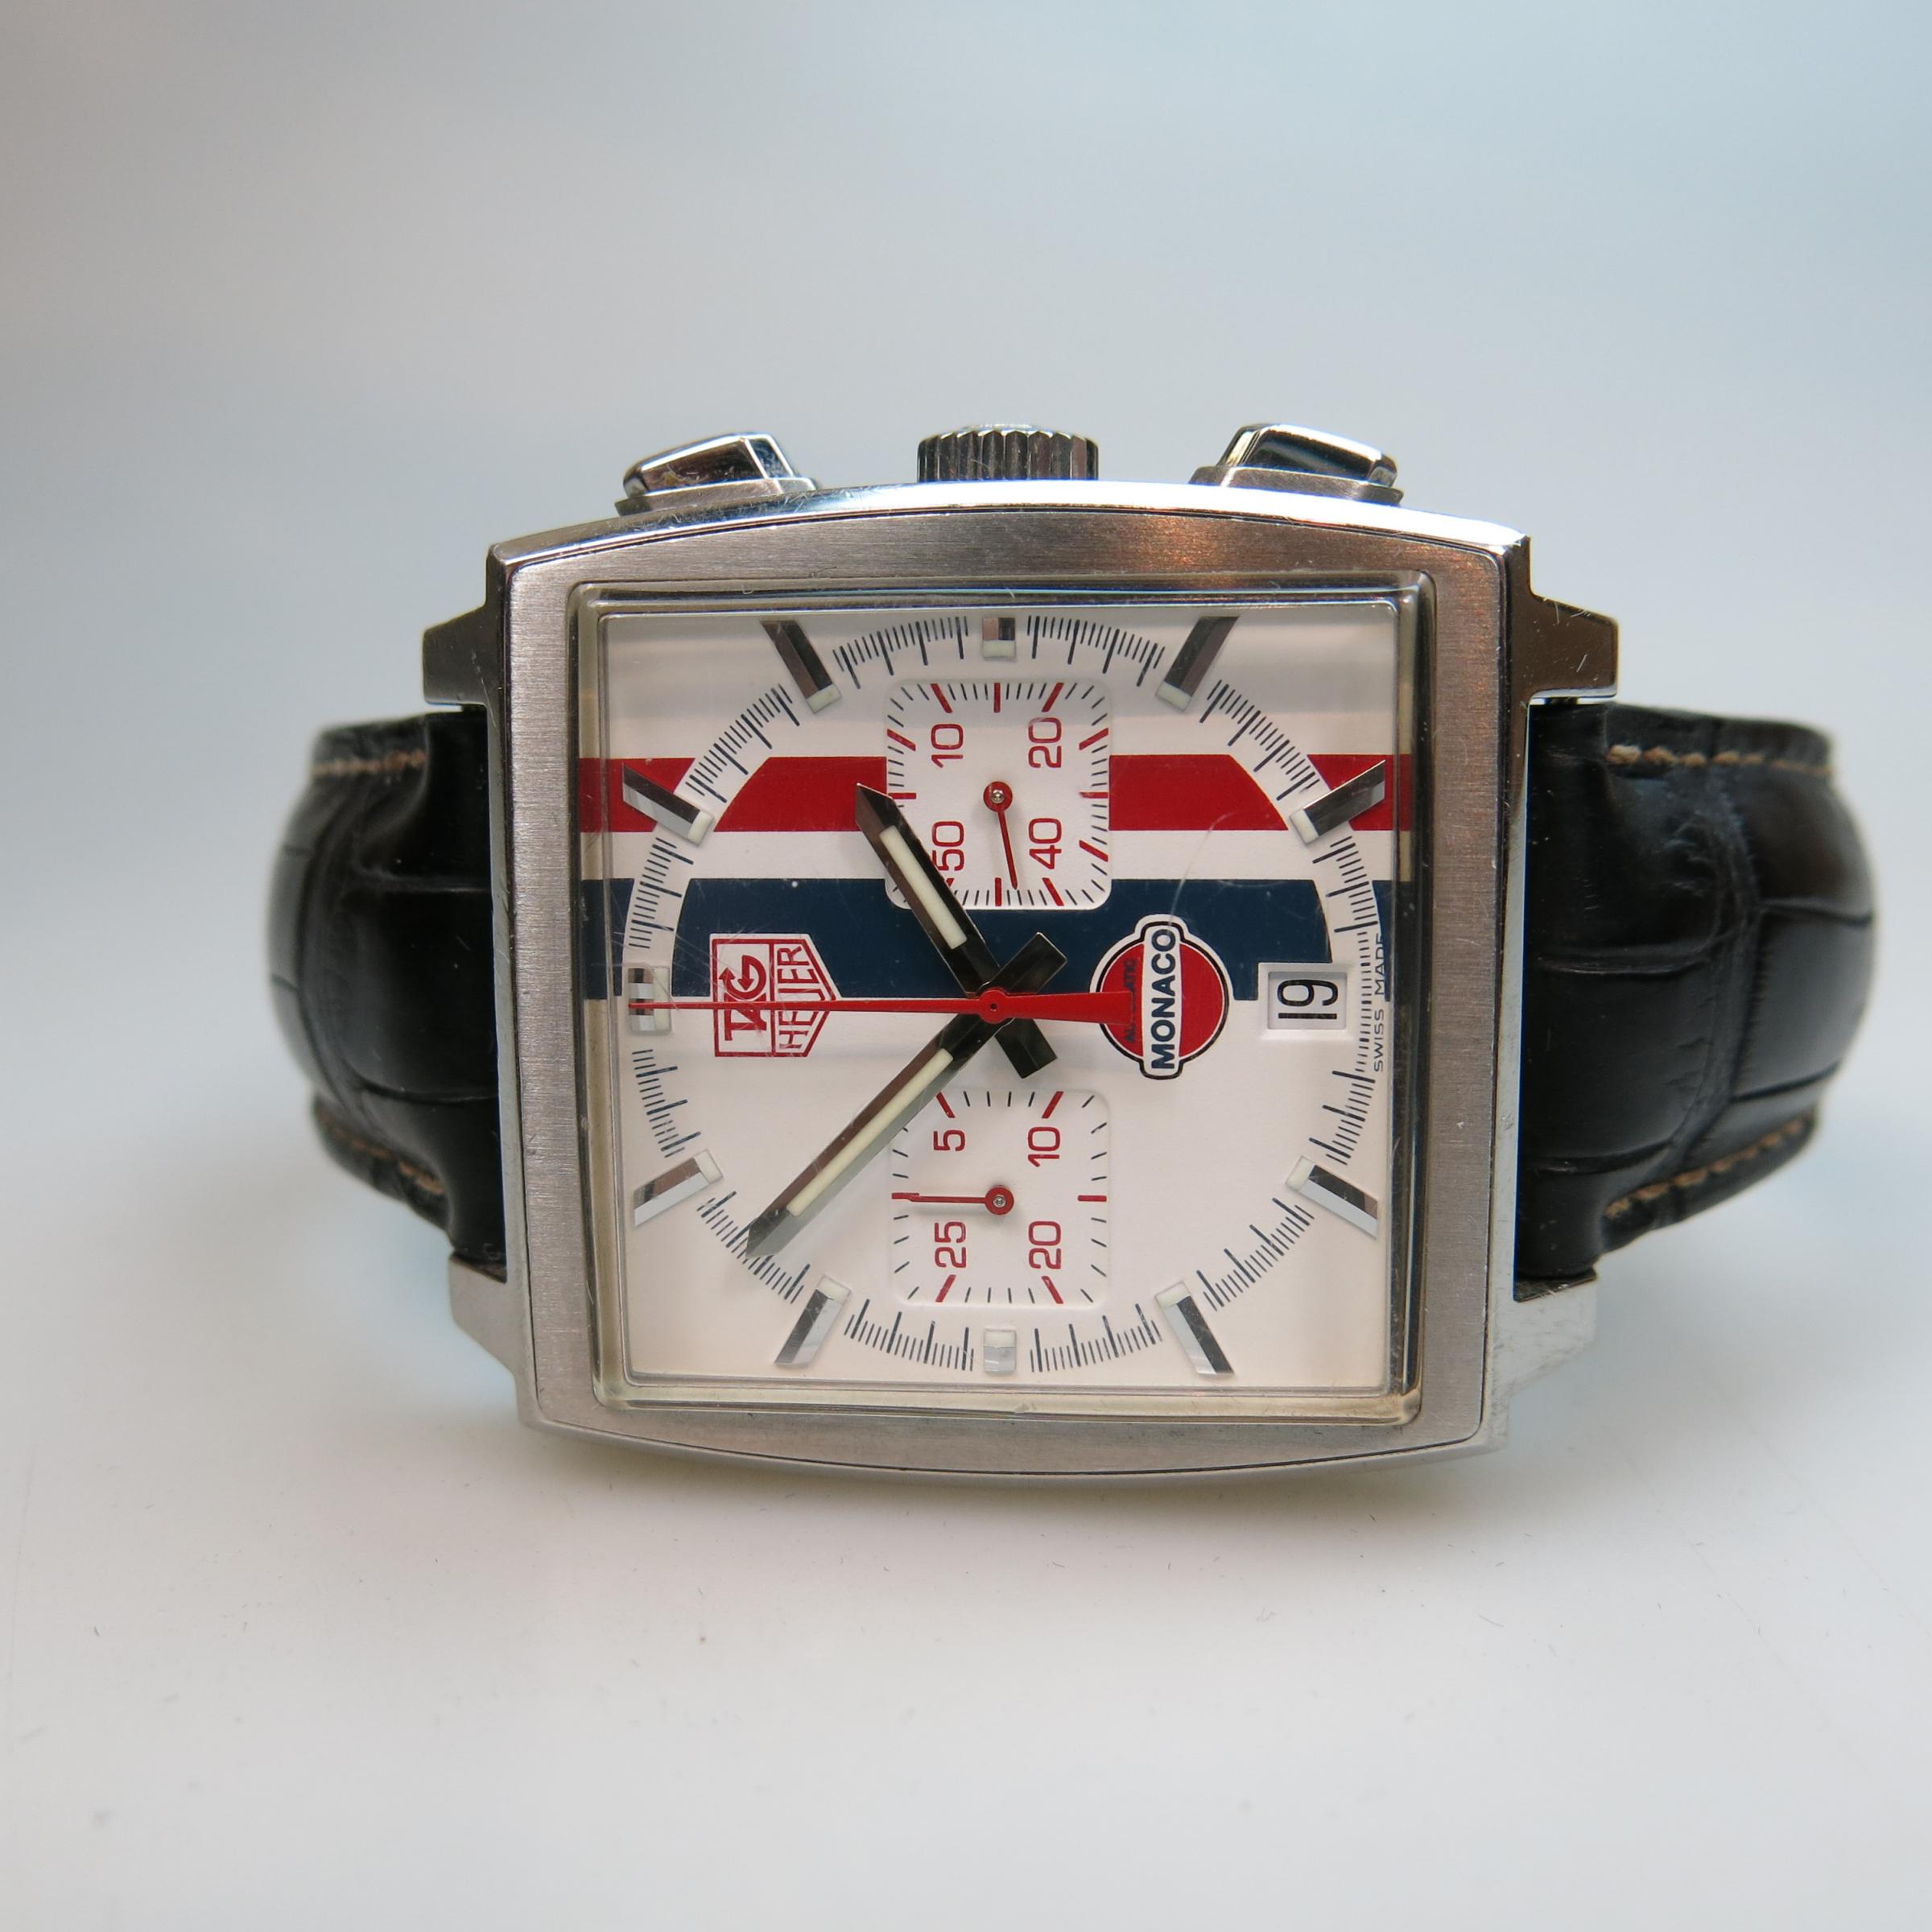 Tag Heuer Monaco 'Gulf' Wristwatch With Chronograph And Date